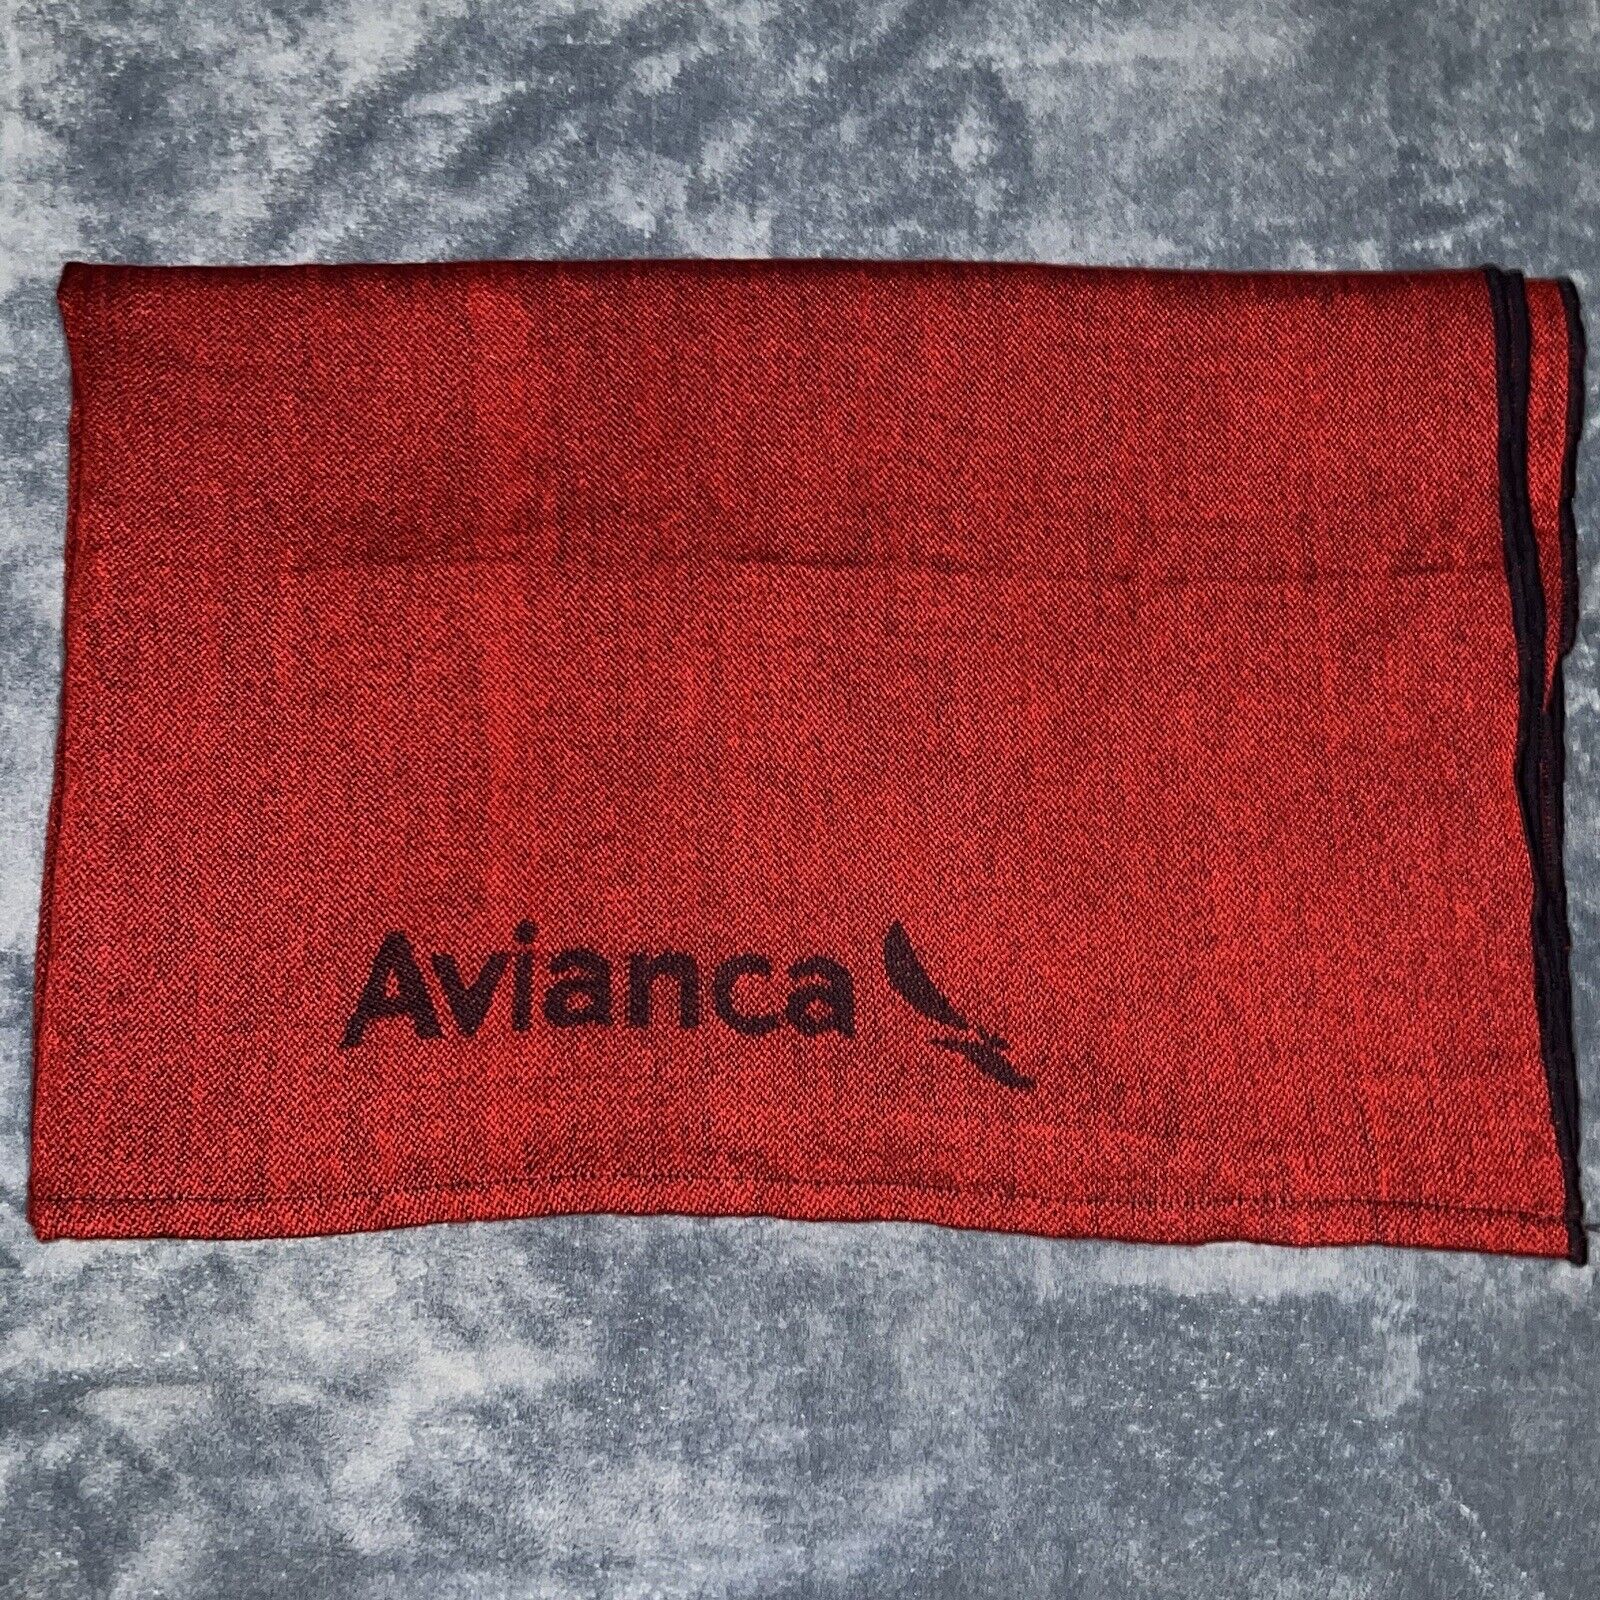 Avianca Airlines Blanket Colombia Airline Cabin Travel Throw Logo 60”x46” Vtg